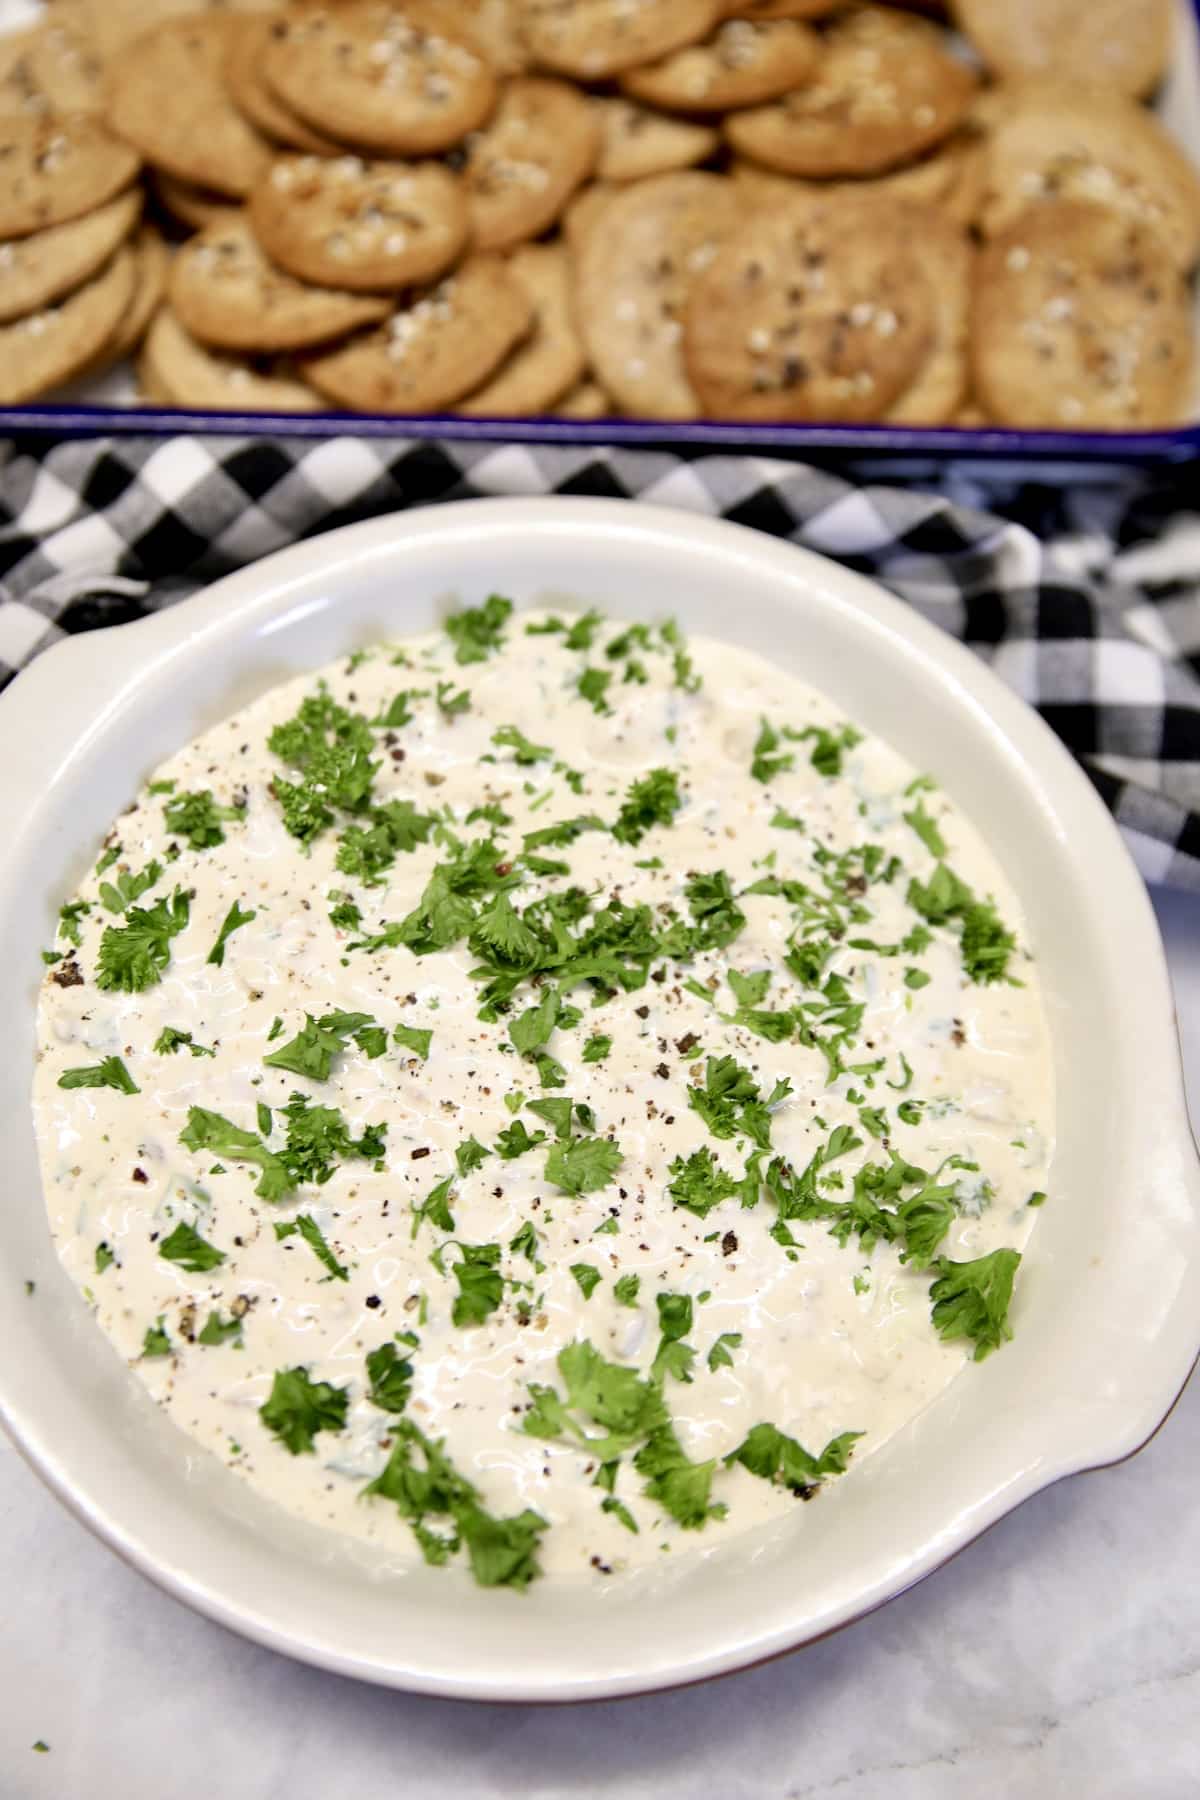 Bowl of clam dip and tray of crackers.